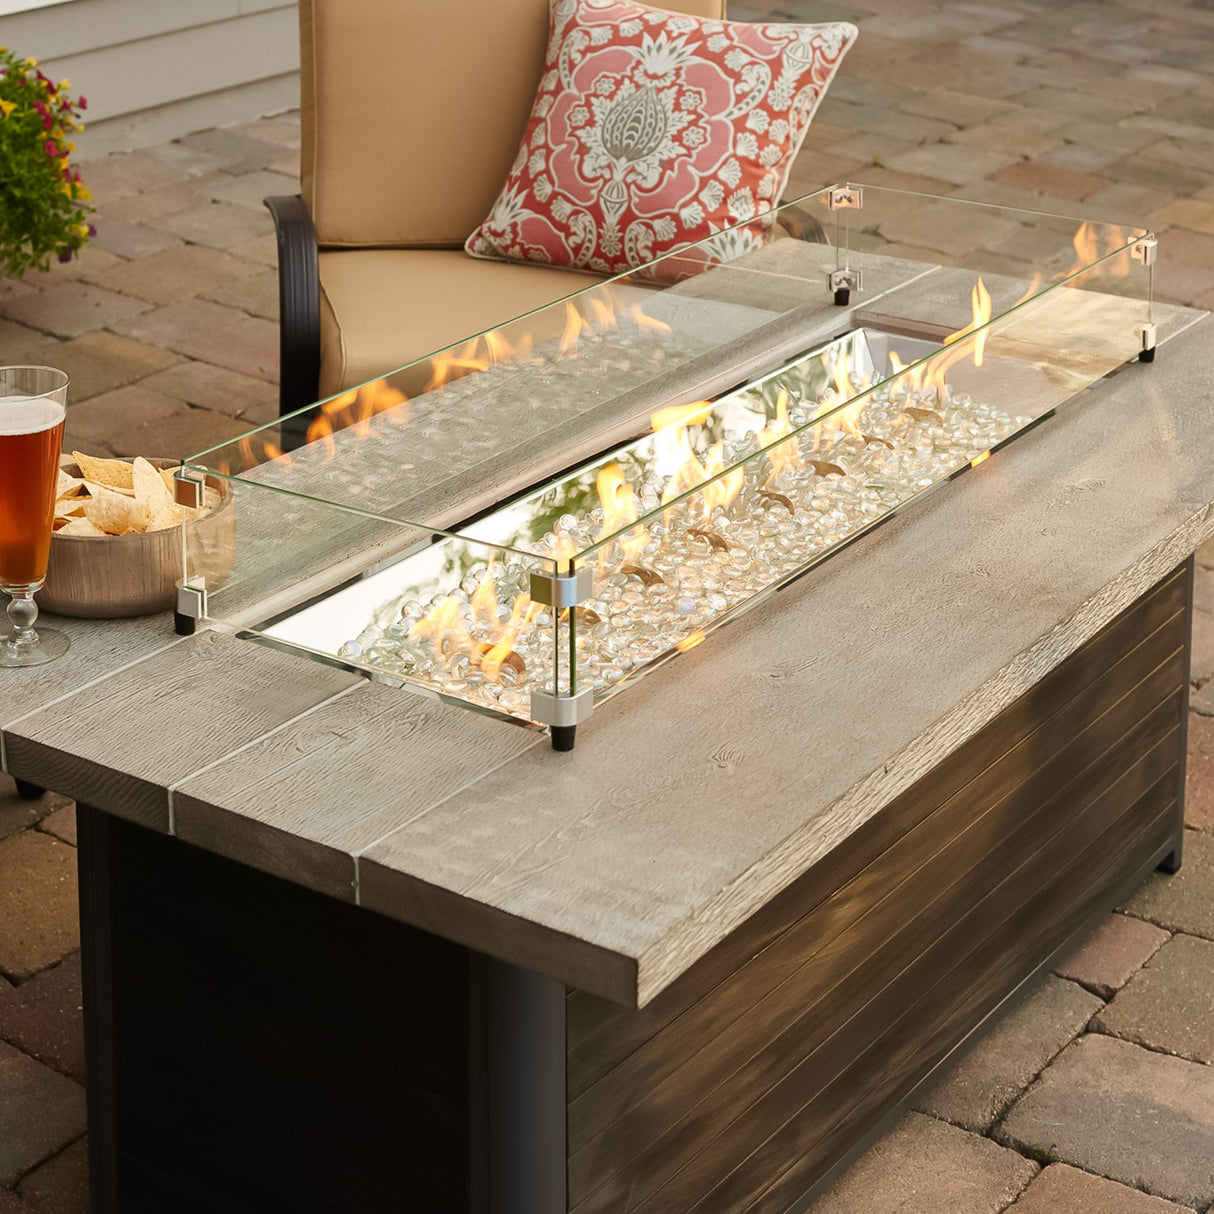 A close up view of the Cedar Ridge Linear Gas Fire Pit Table with a glass wind guard being used to protect the flame from the wind